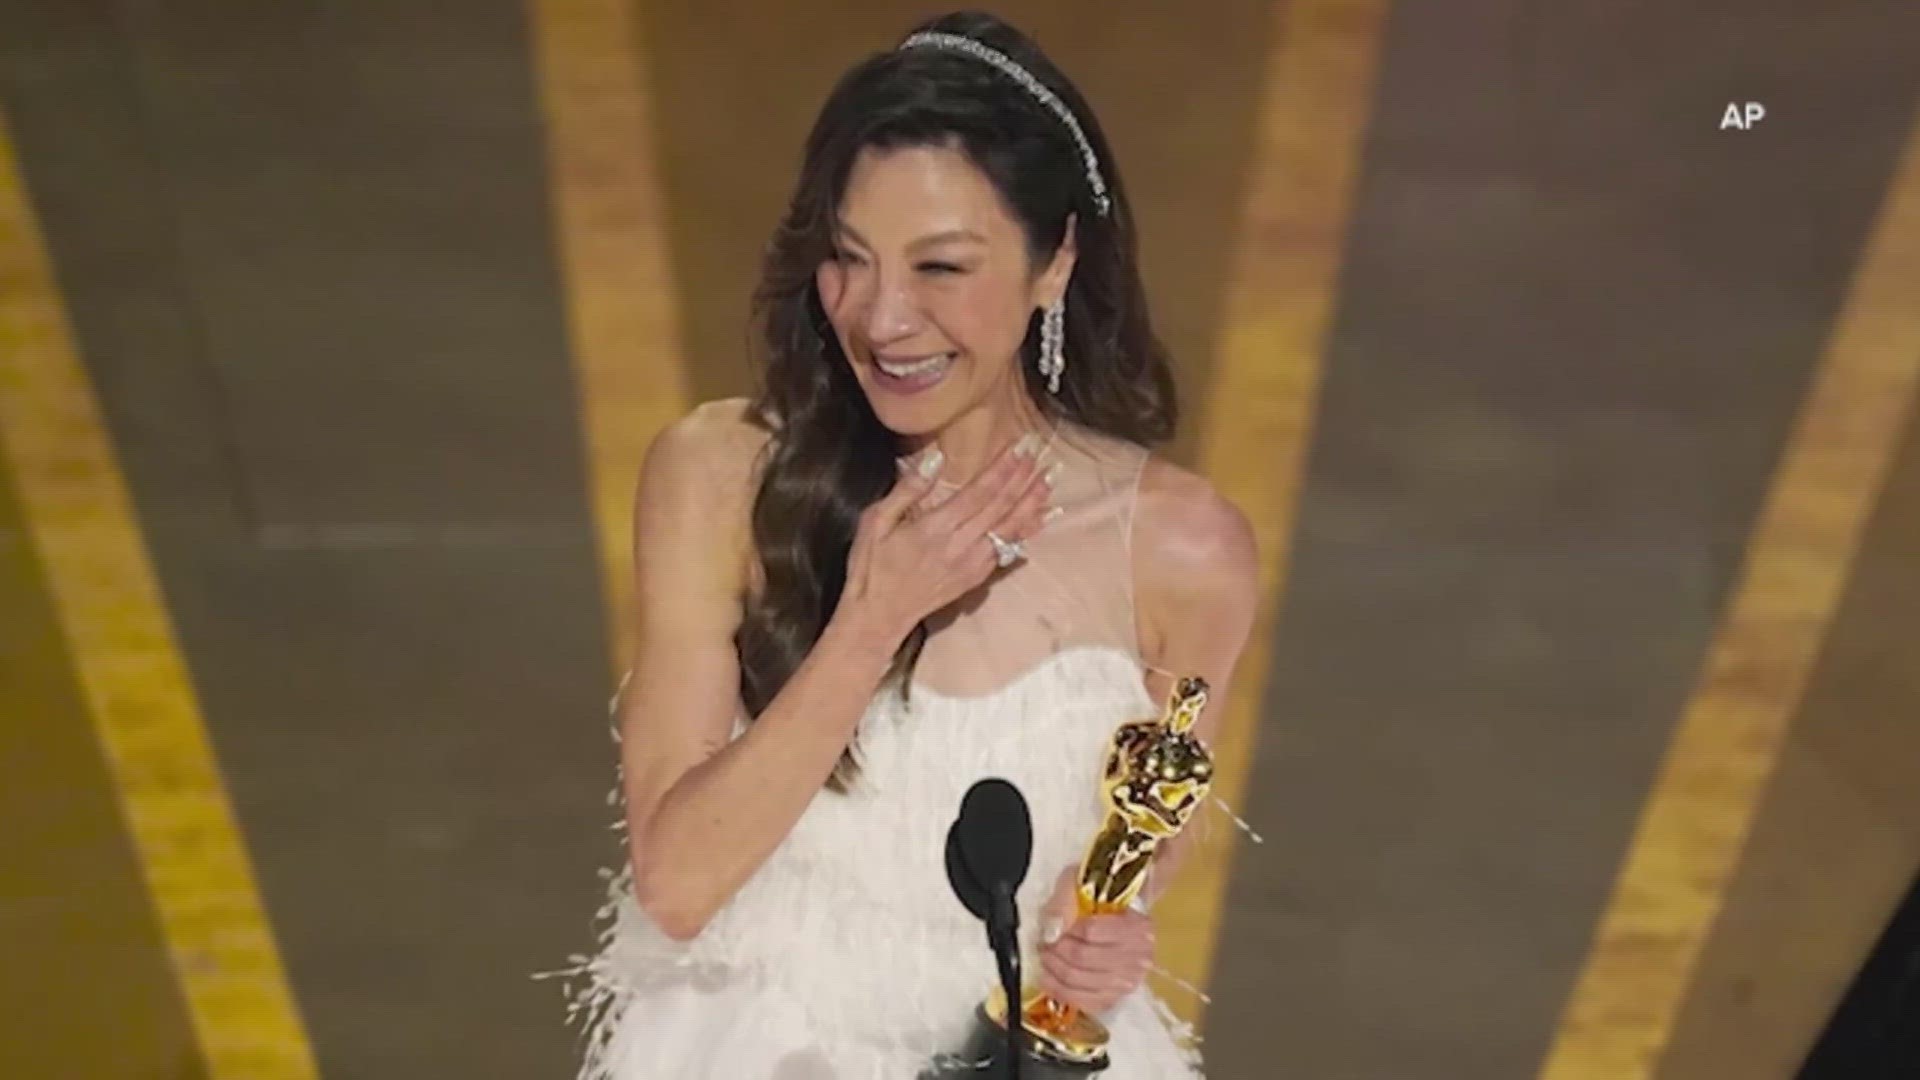 Matthew Hanjoong cheered excitedly with his hands in the air as he watched a historic moment unfold on TV - Michelle Yeoh had just won the Best Actress Oscar.